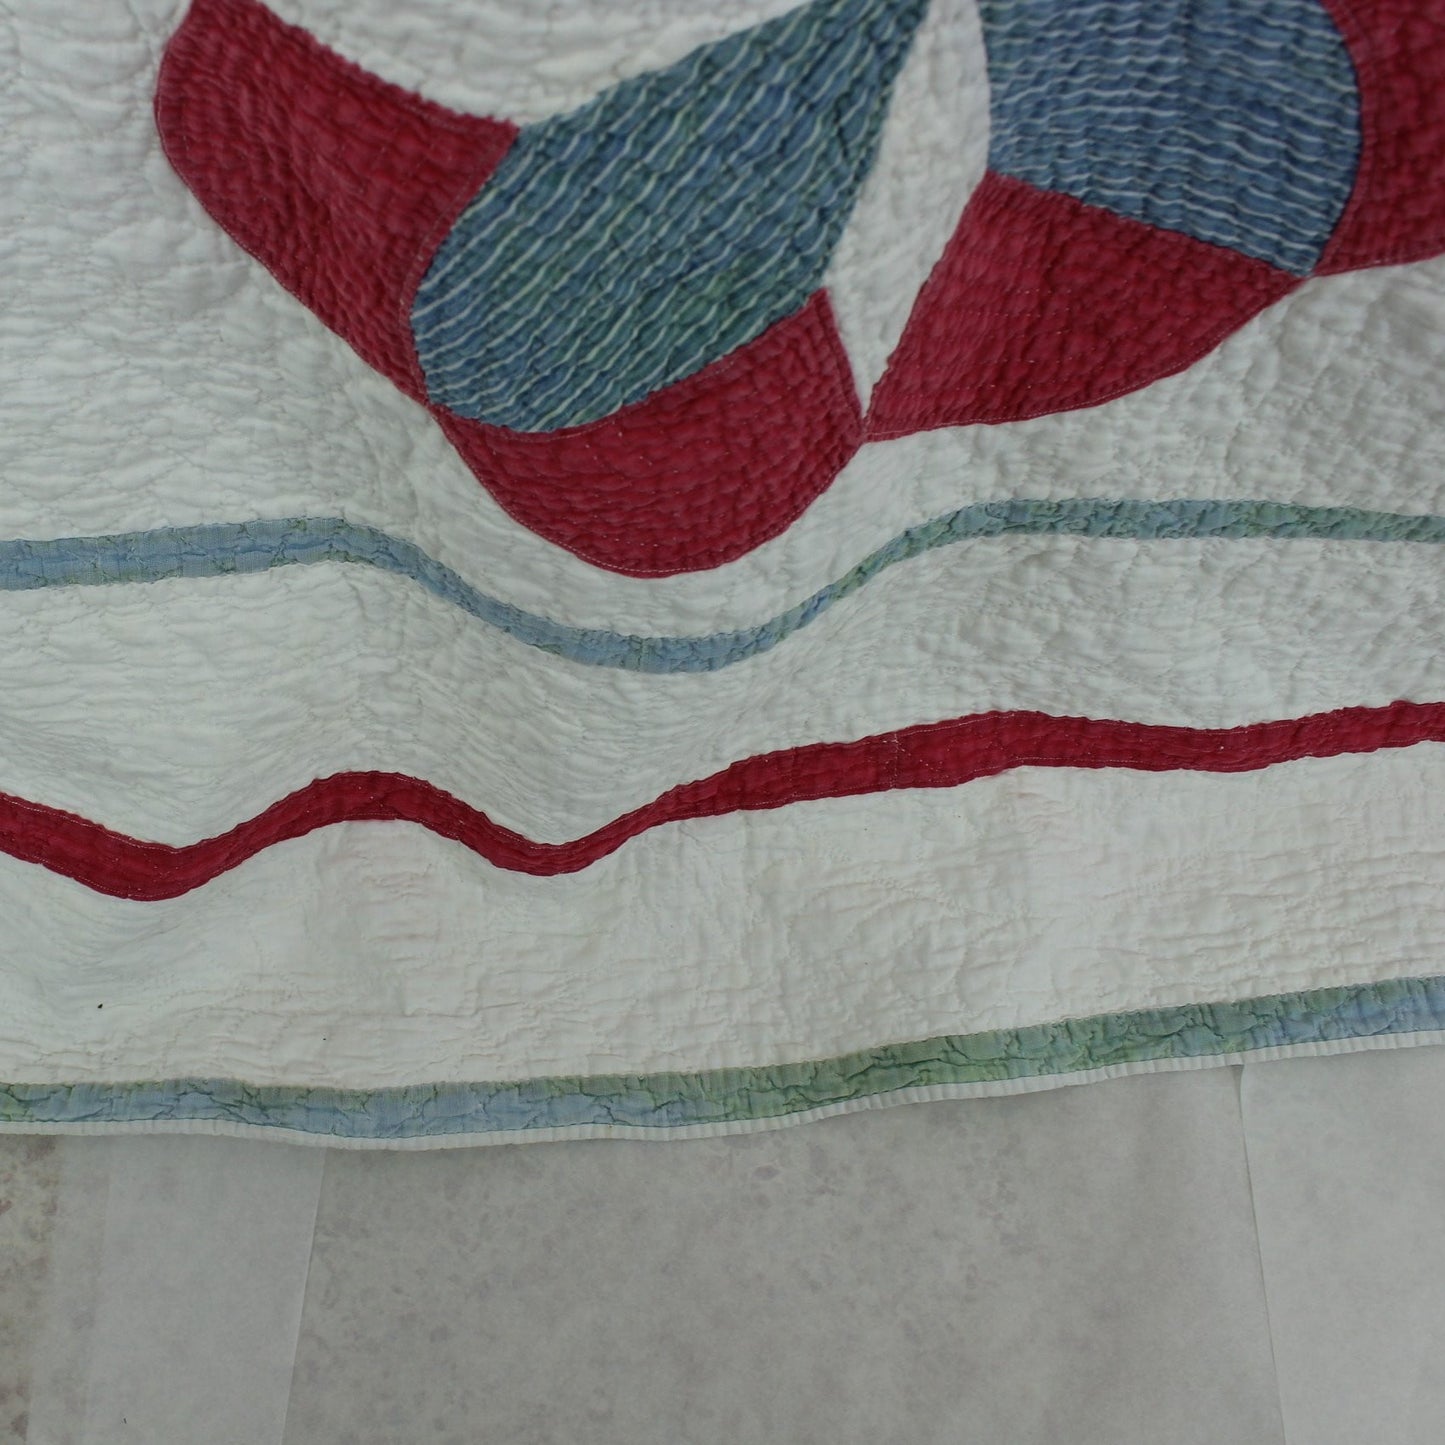 Antique Intricate Hand Stitched Quilt - Early 1900s Cotton Red Blue 9 Design - Natural Cotton Fill all season bed cover